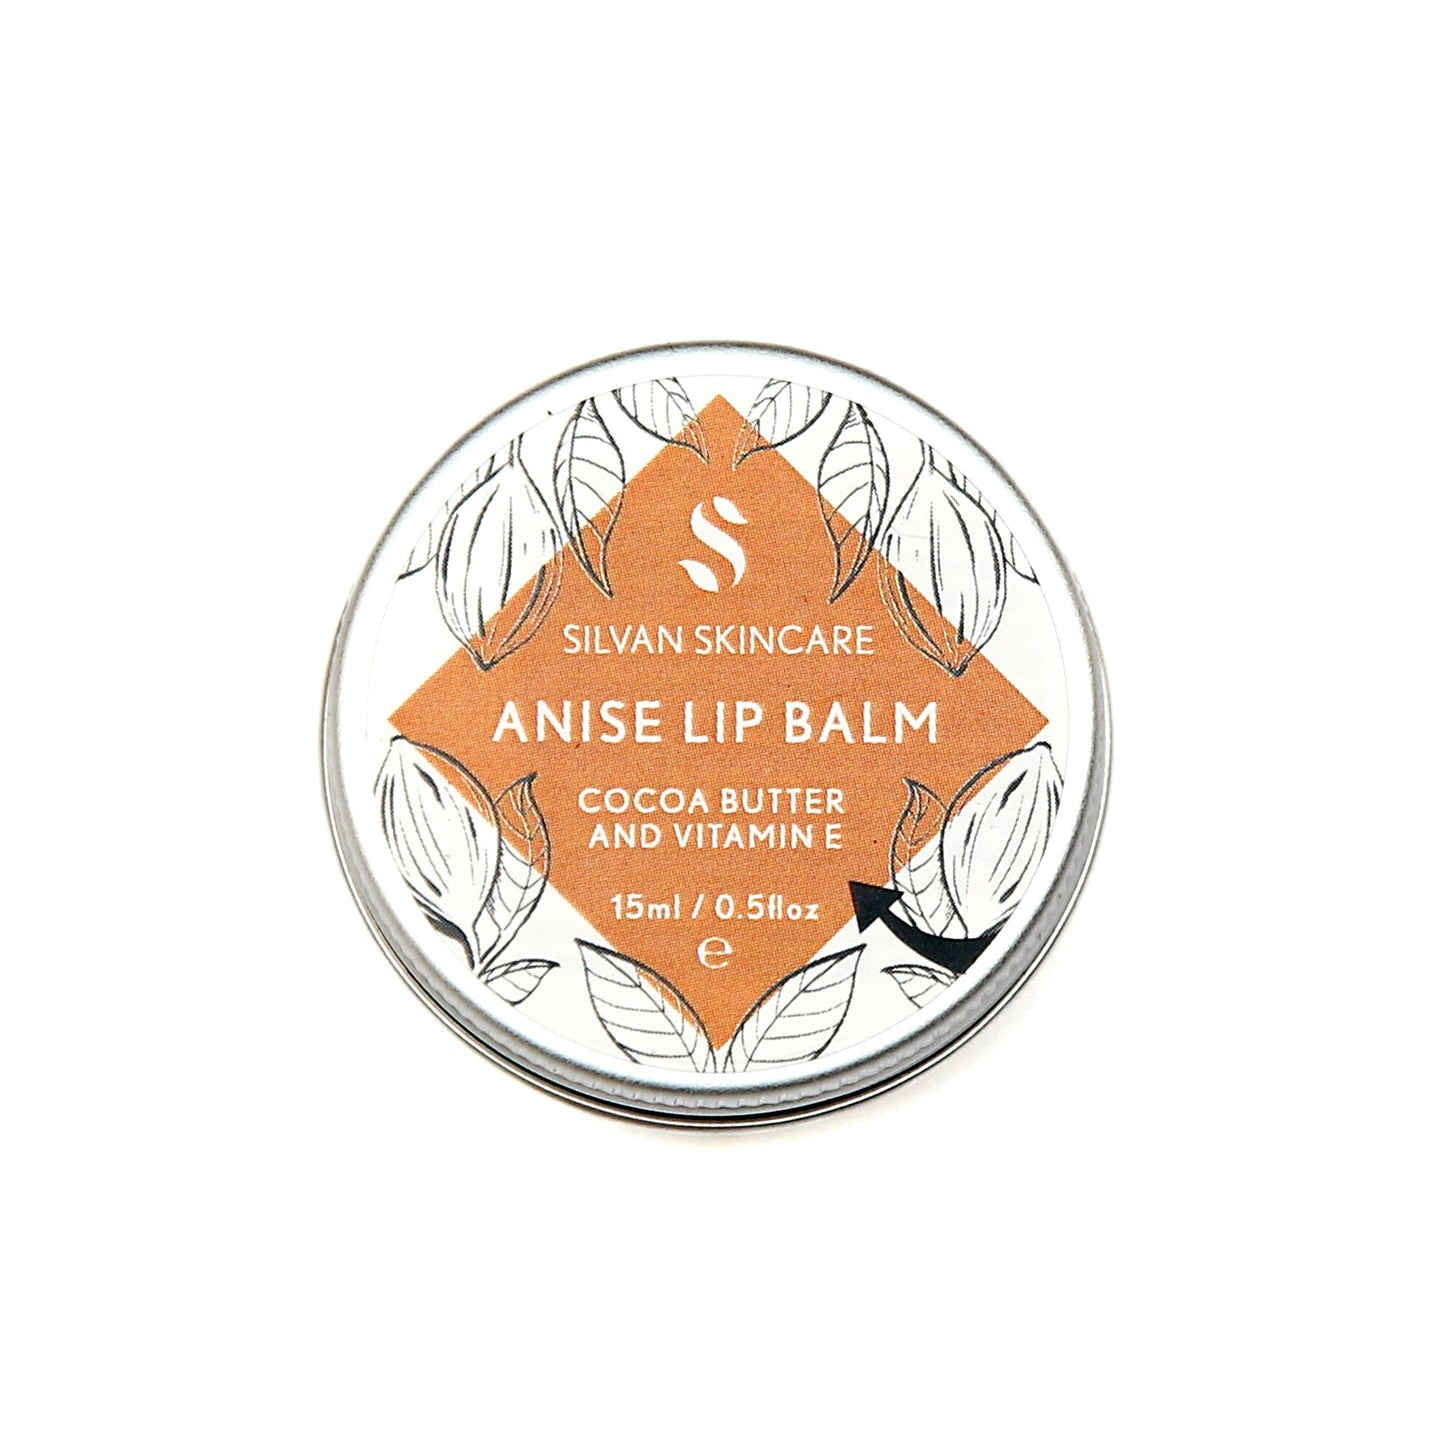 Single aluminium tin of the Silvan Skincare anise lip balm. The label is round and white with a central diamond in dark orange and botanical illustrations around it.